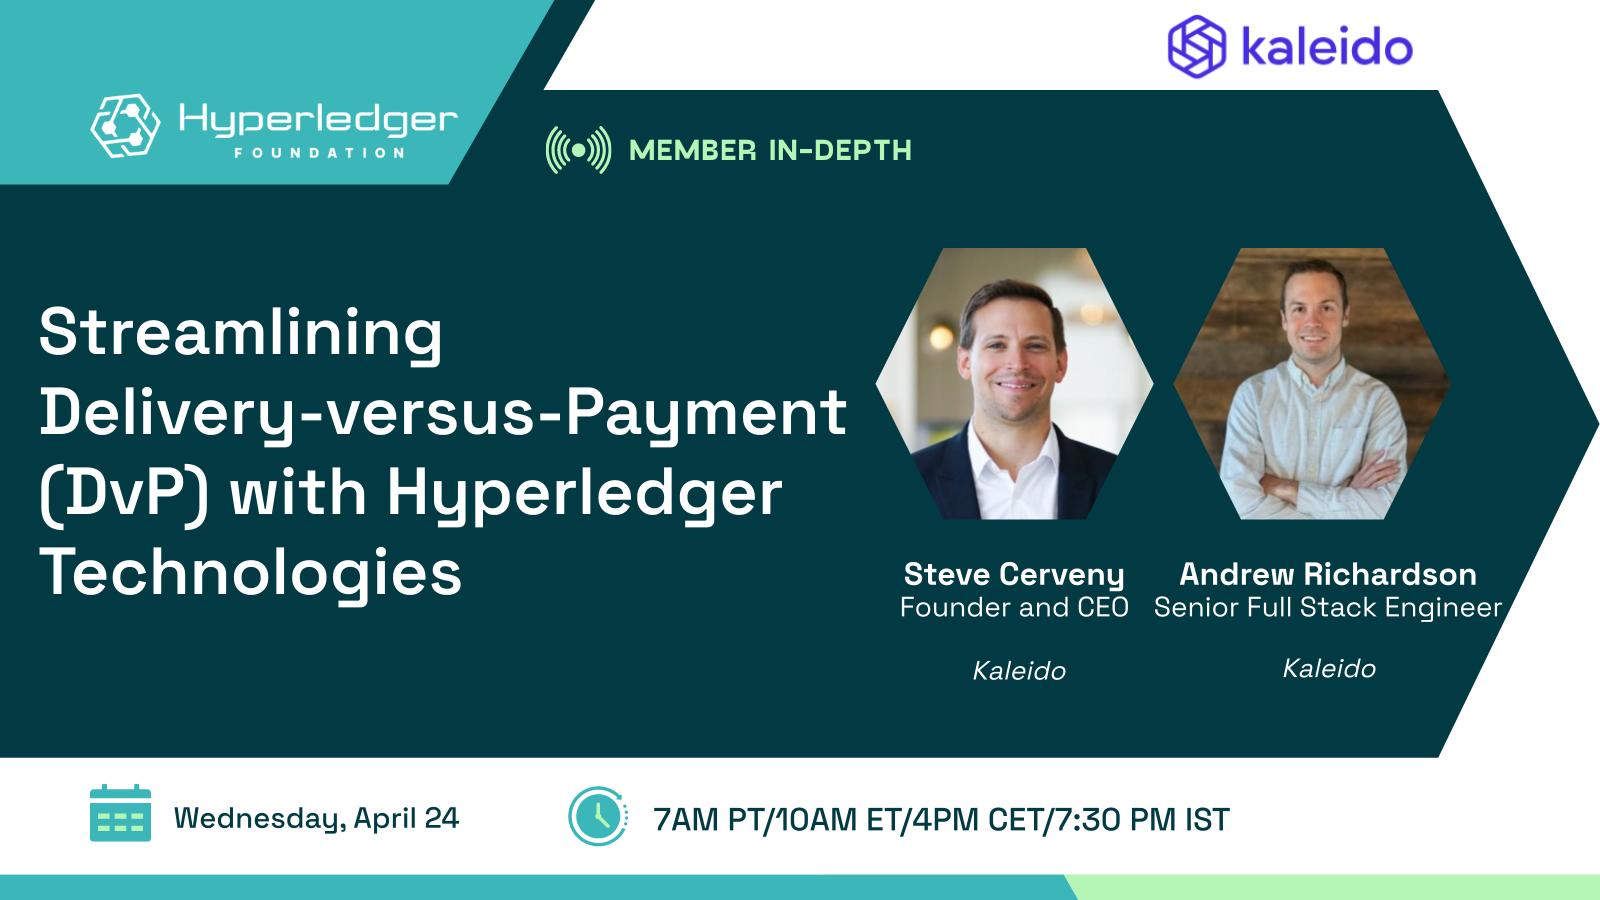 Hyperledger In-depth with Kaleido: Streamlining Delivery-versus-Payment (DvP) with Hyperledger Technologies